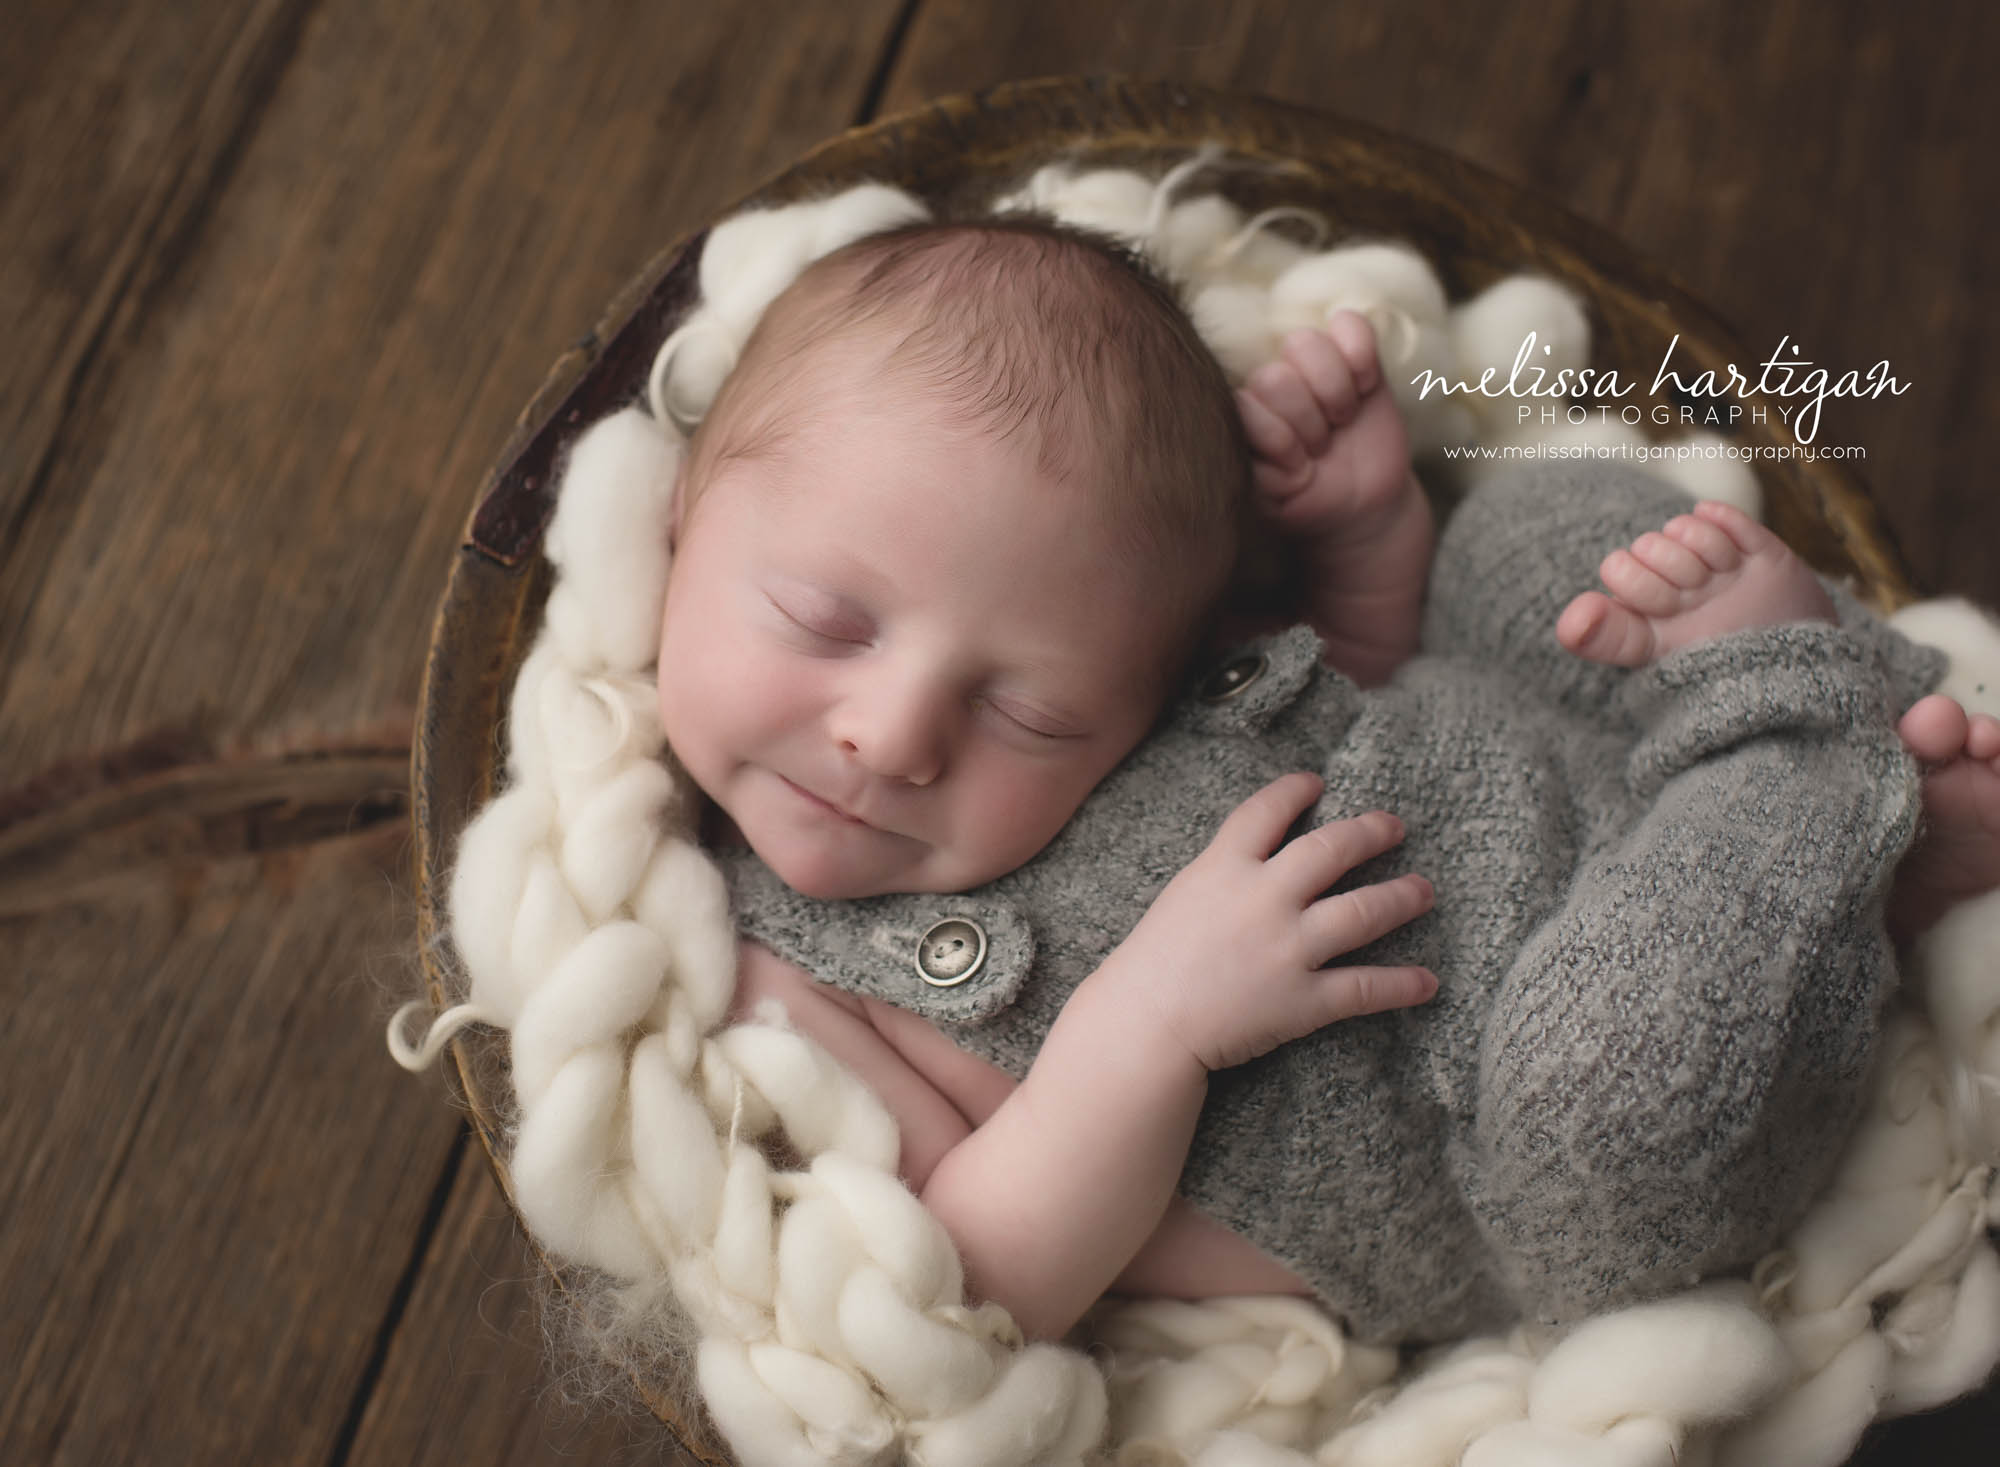 Melissa Hartigan Photography Coventry CT Newborn & Maternity Photographer Coventry CT Maternity Newborn Session Chase sleeping in wooden bowl with cream knit blanket wearing gray knit overalls